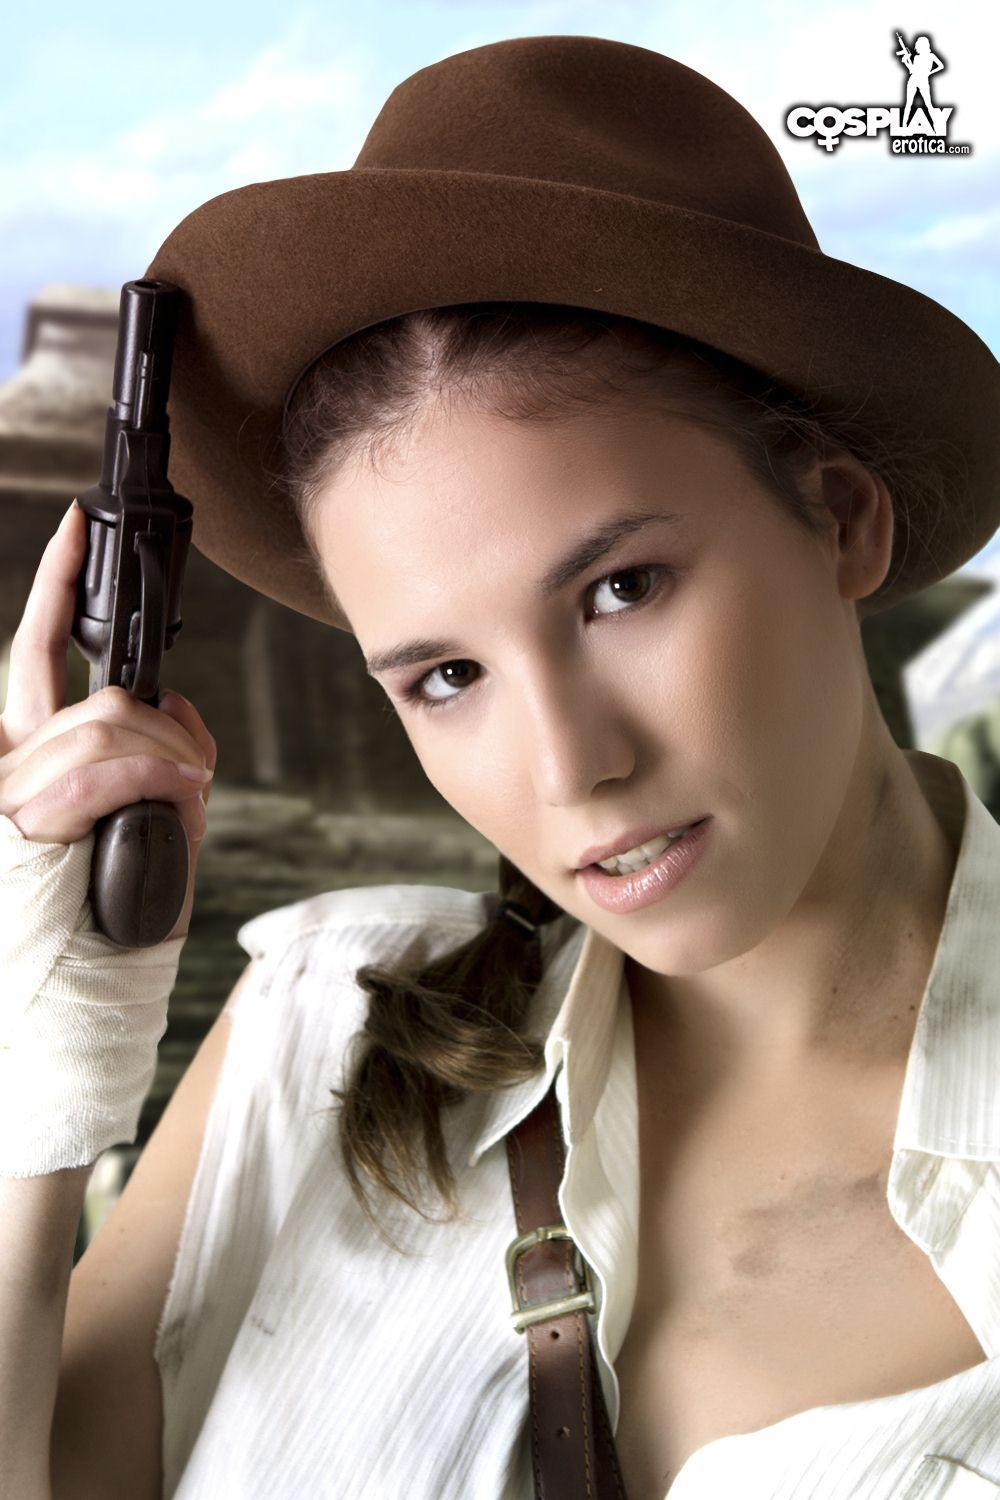 Cosplayer Cassie dresses up as a sexy female Indiana Jones #53702571